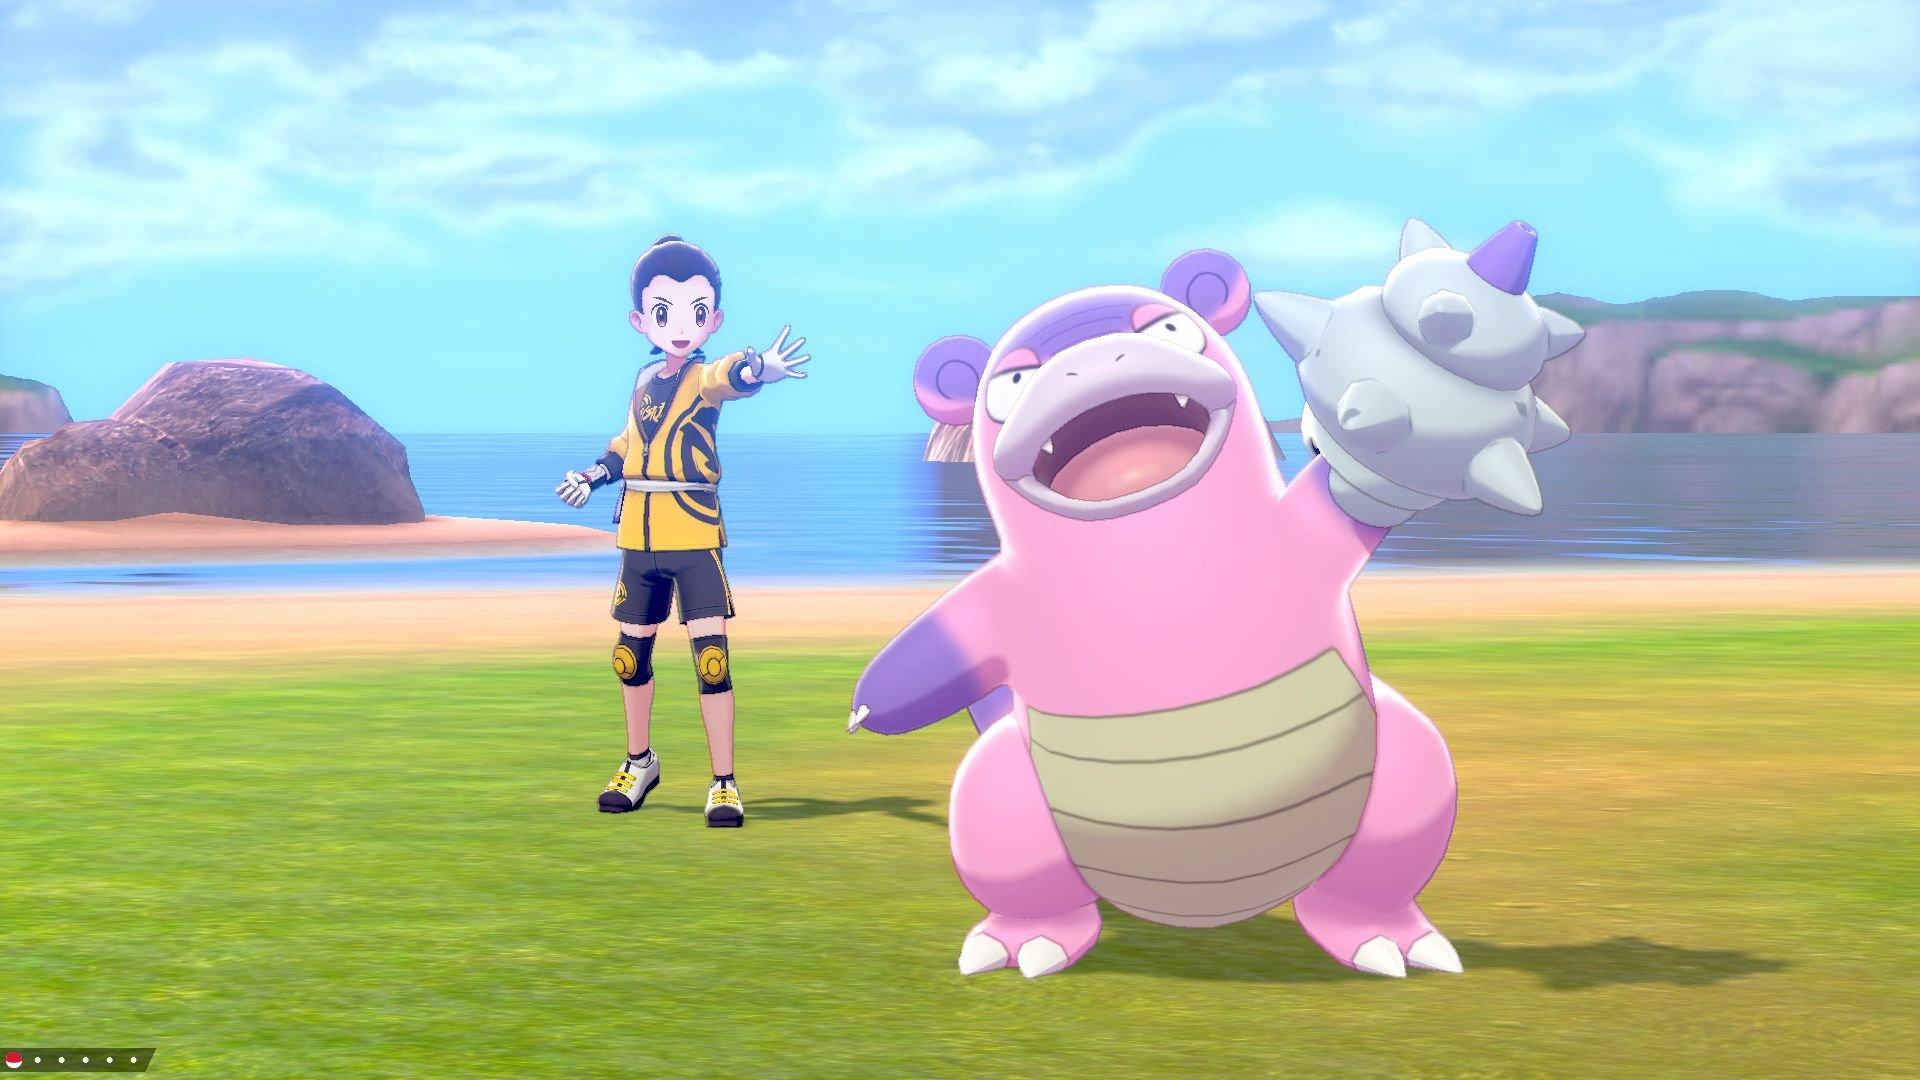 Pokémon Sword And Shield Expansion Pass News Teased For Tomorrow, 2nd June